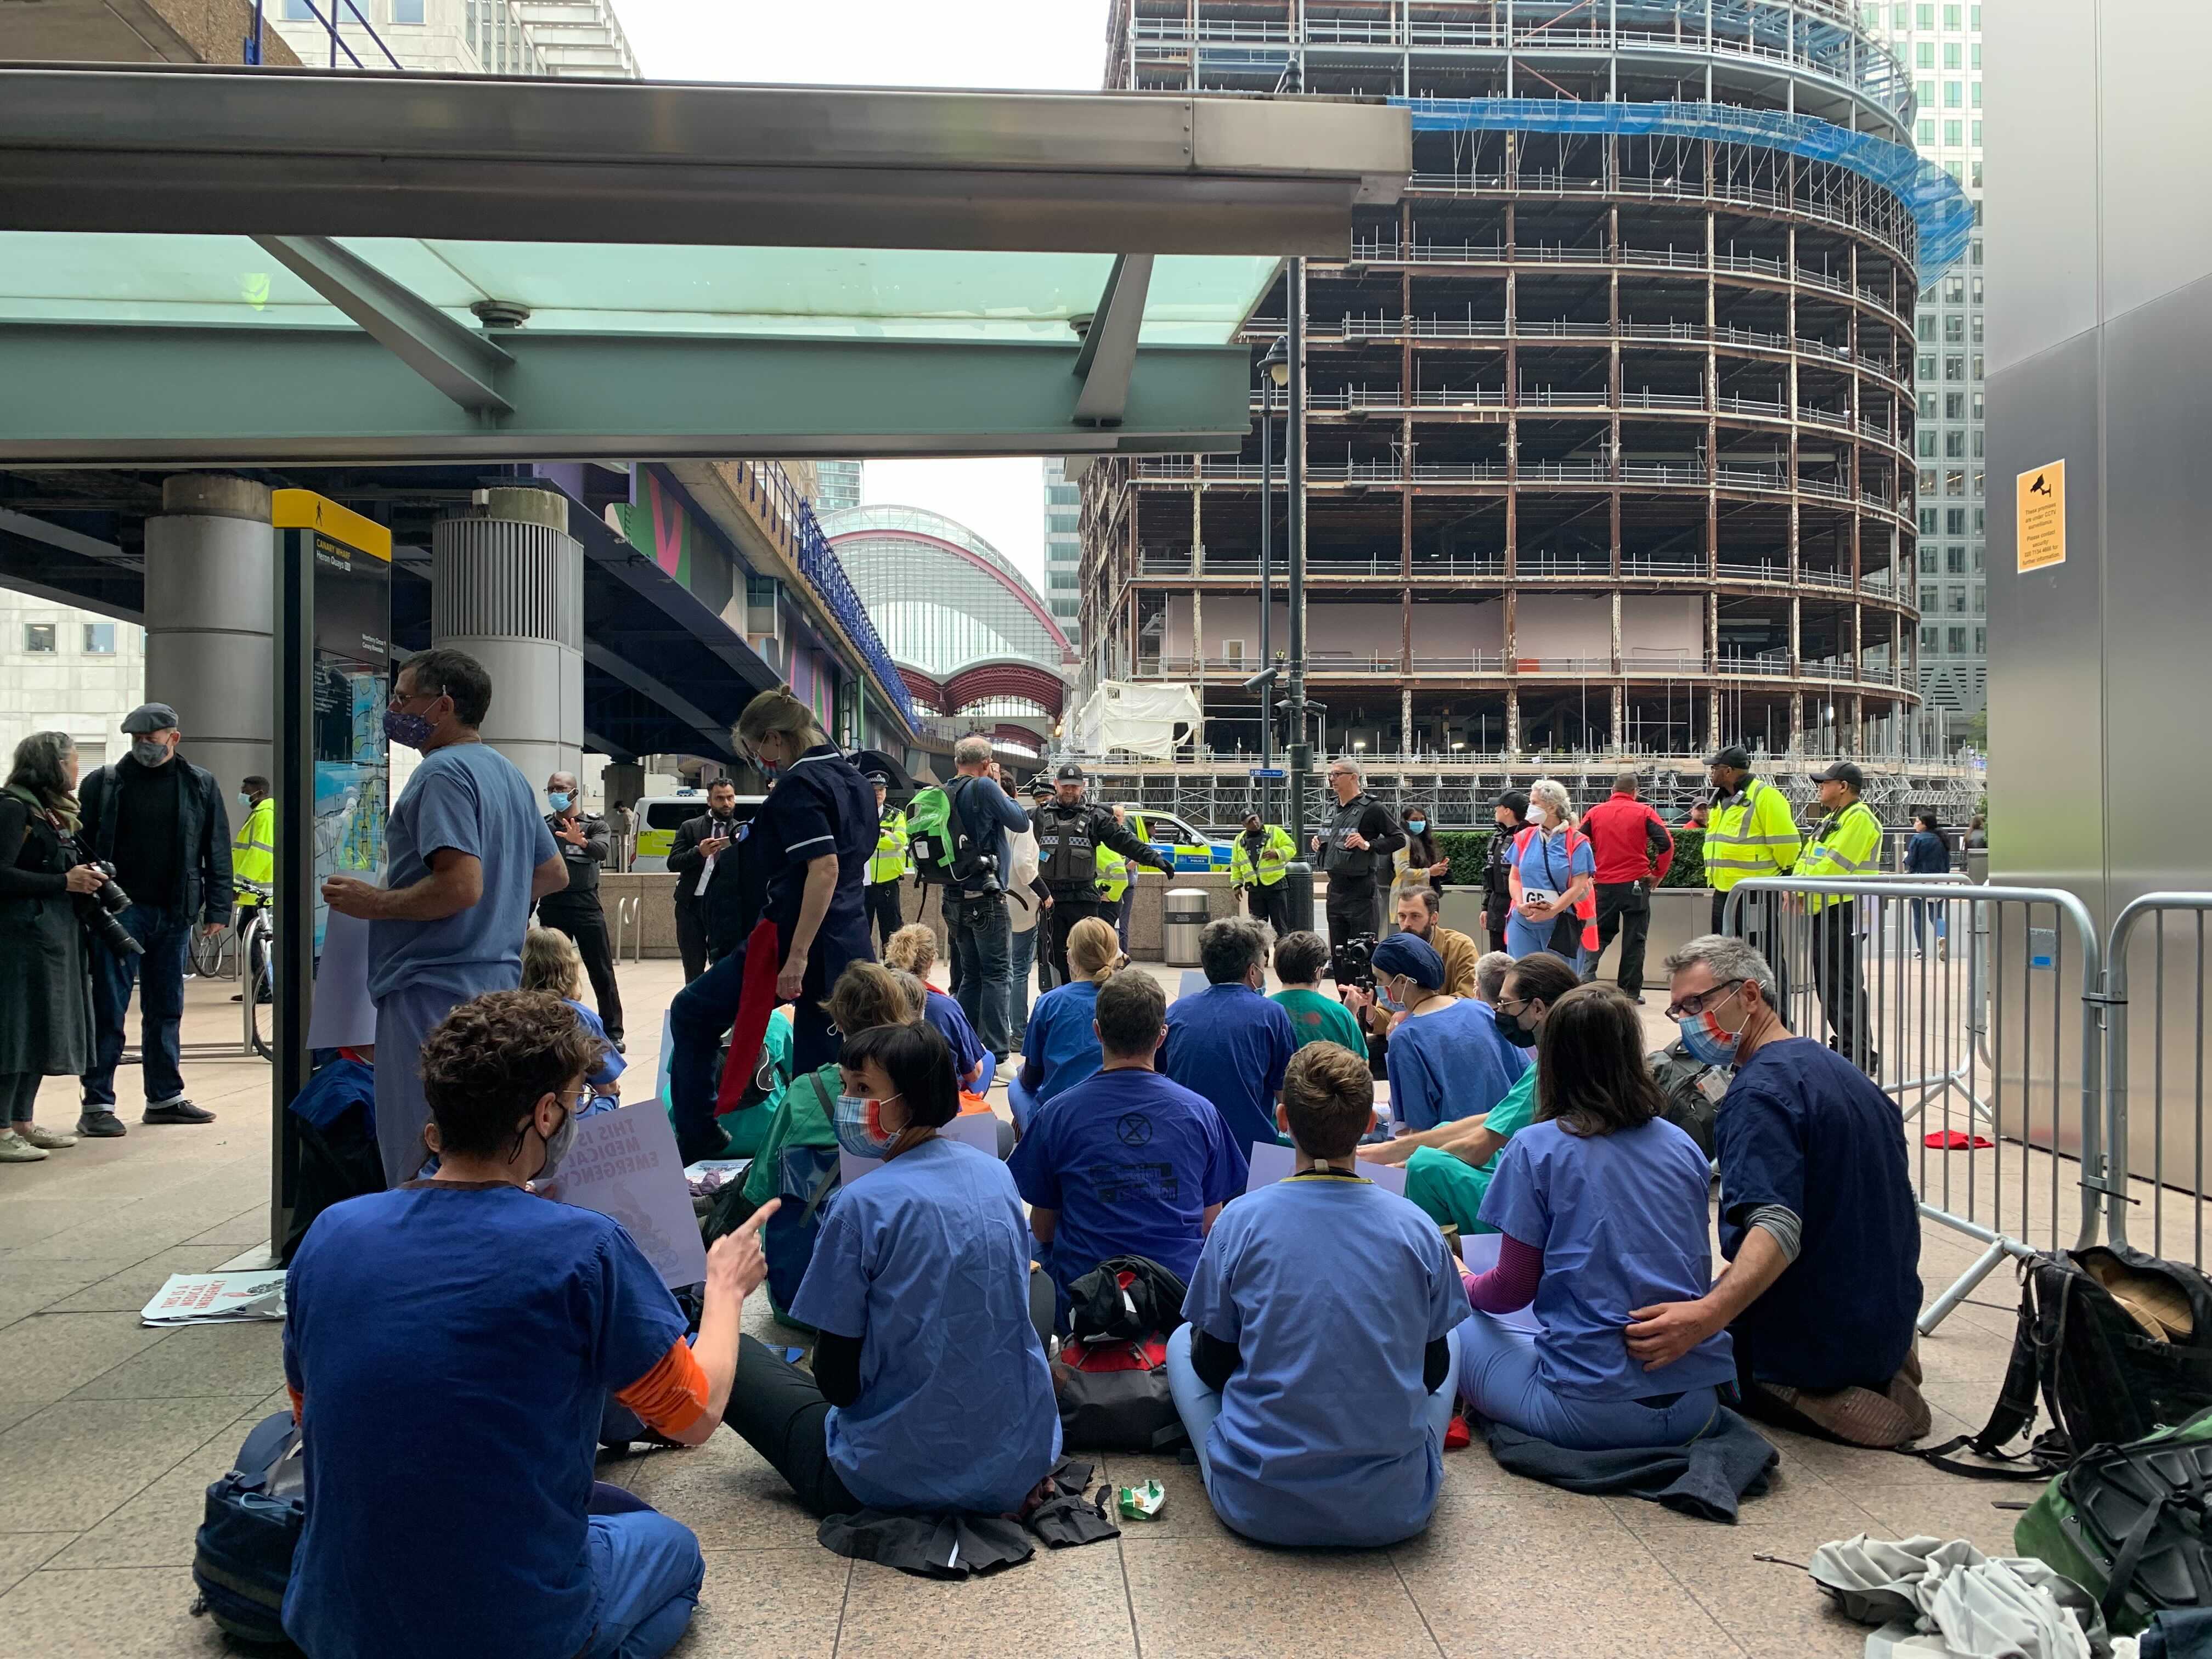 Protesters seen outside a DLR station in east London